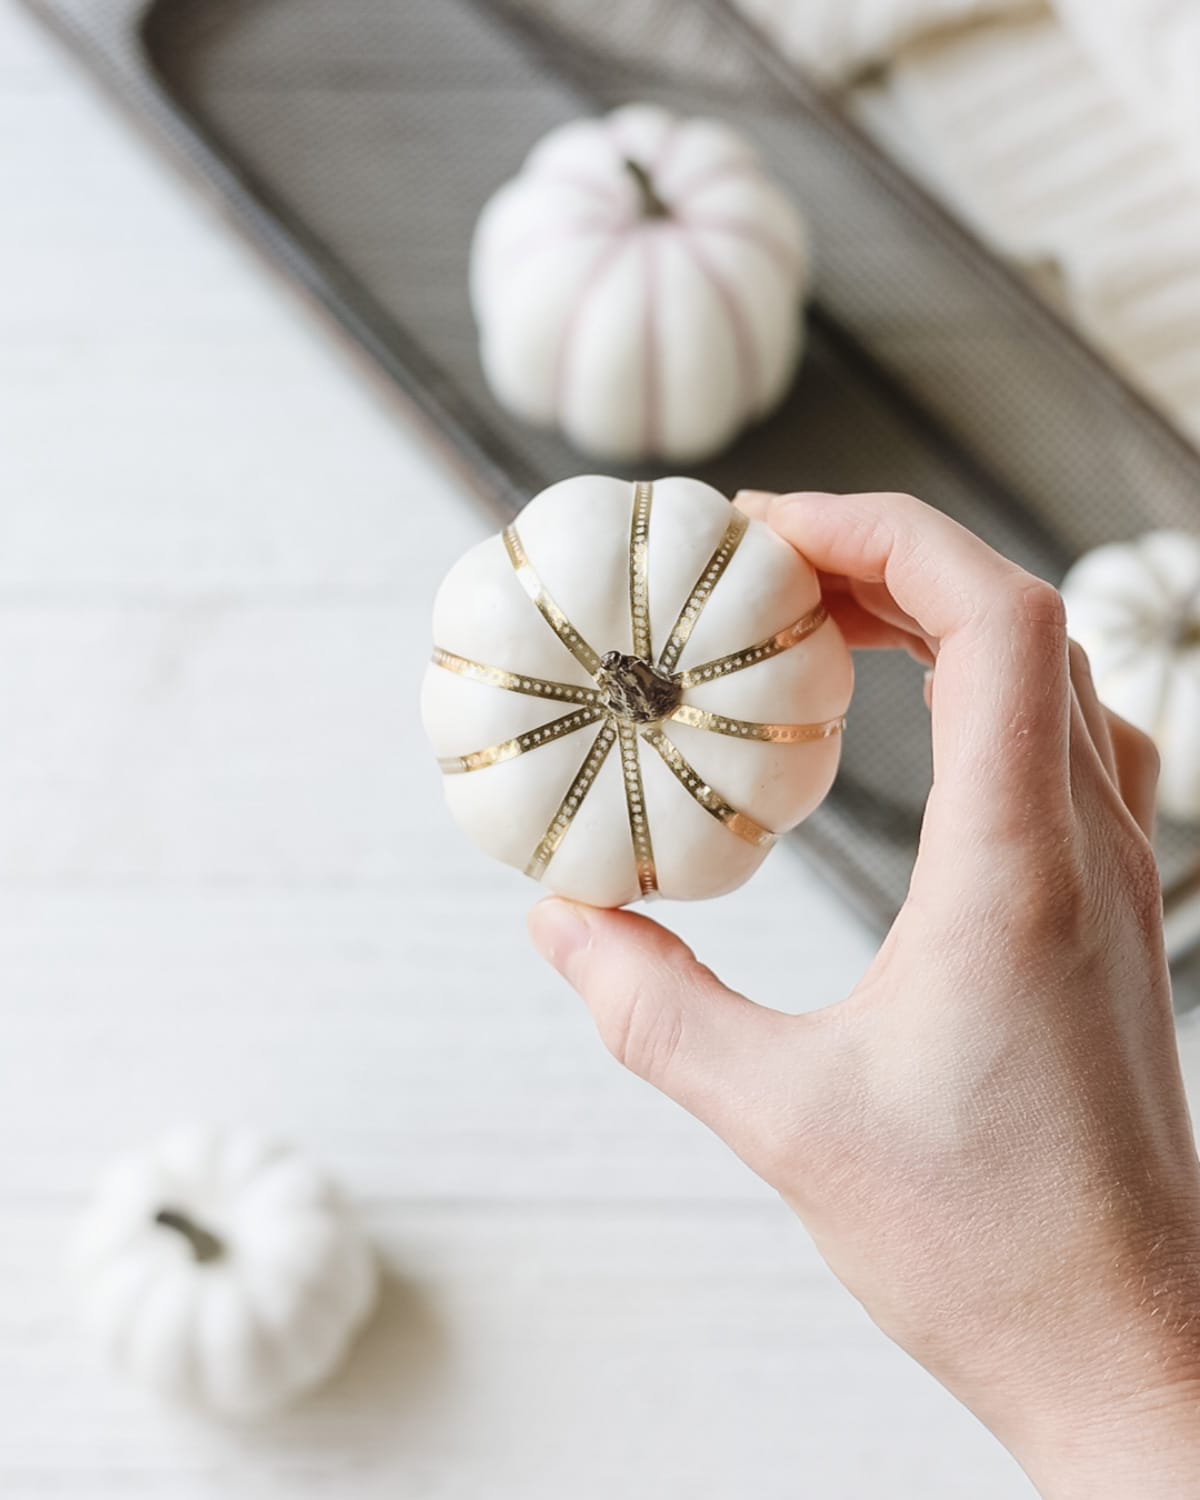 A small white home décor pumpkin decorated with gold washi tape.